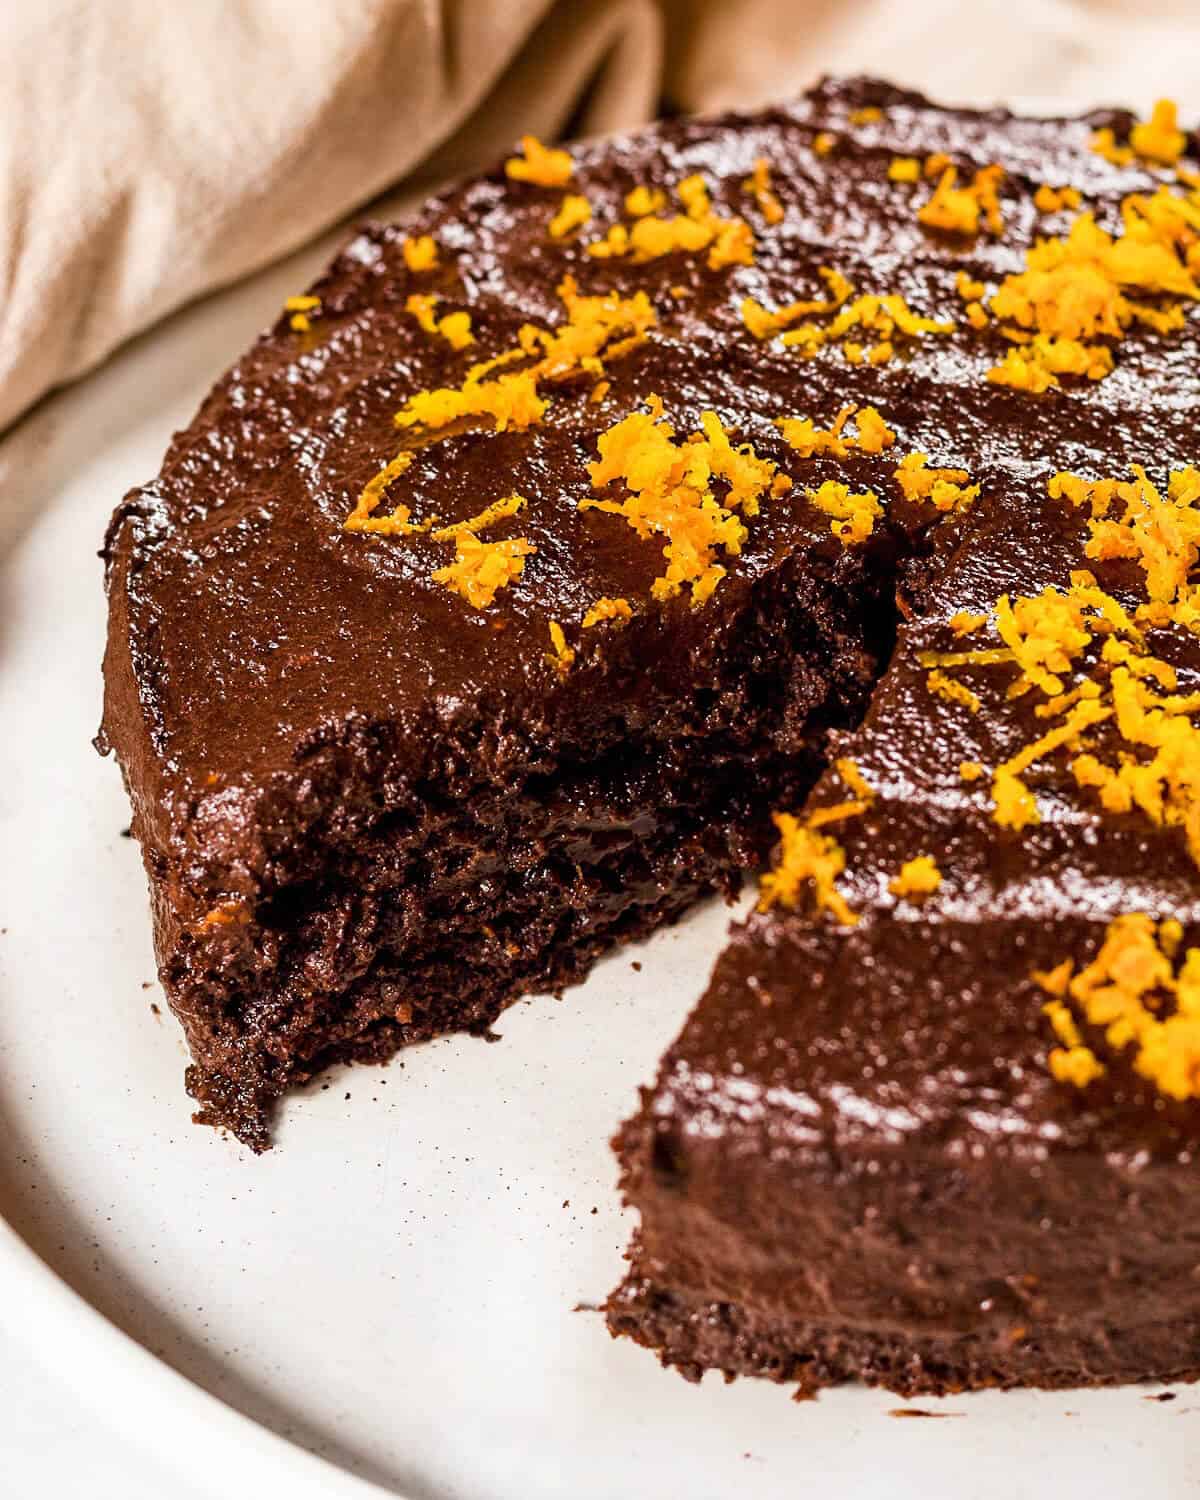 A chocolate orange cake on a white plate, there is a slice missing and you can see the moist texture.